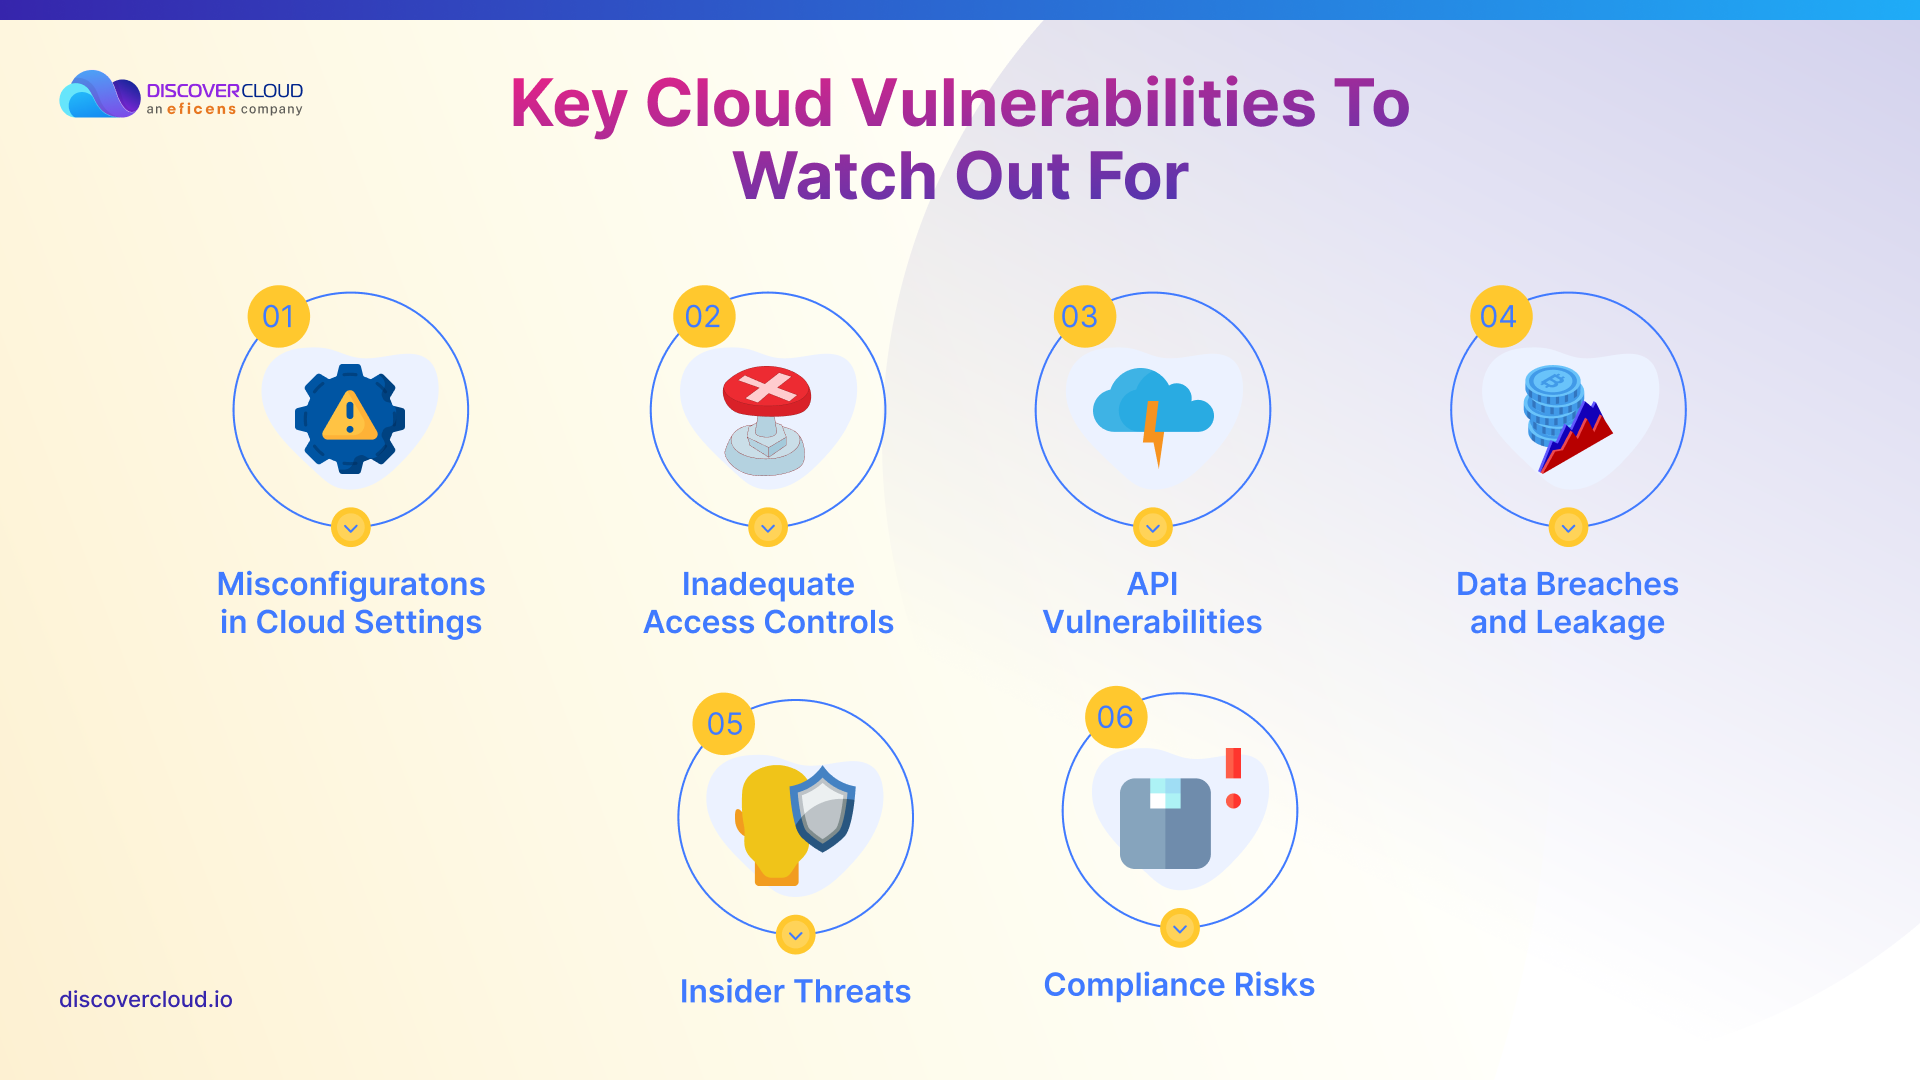 Key Cloud Vulnerabilities to Watch Out For